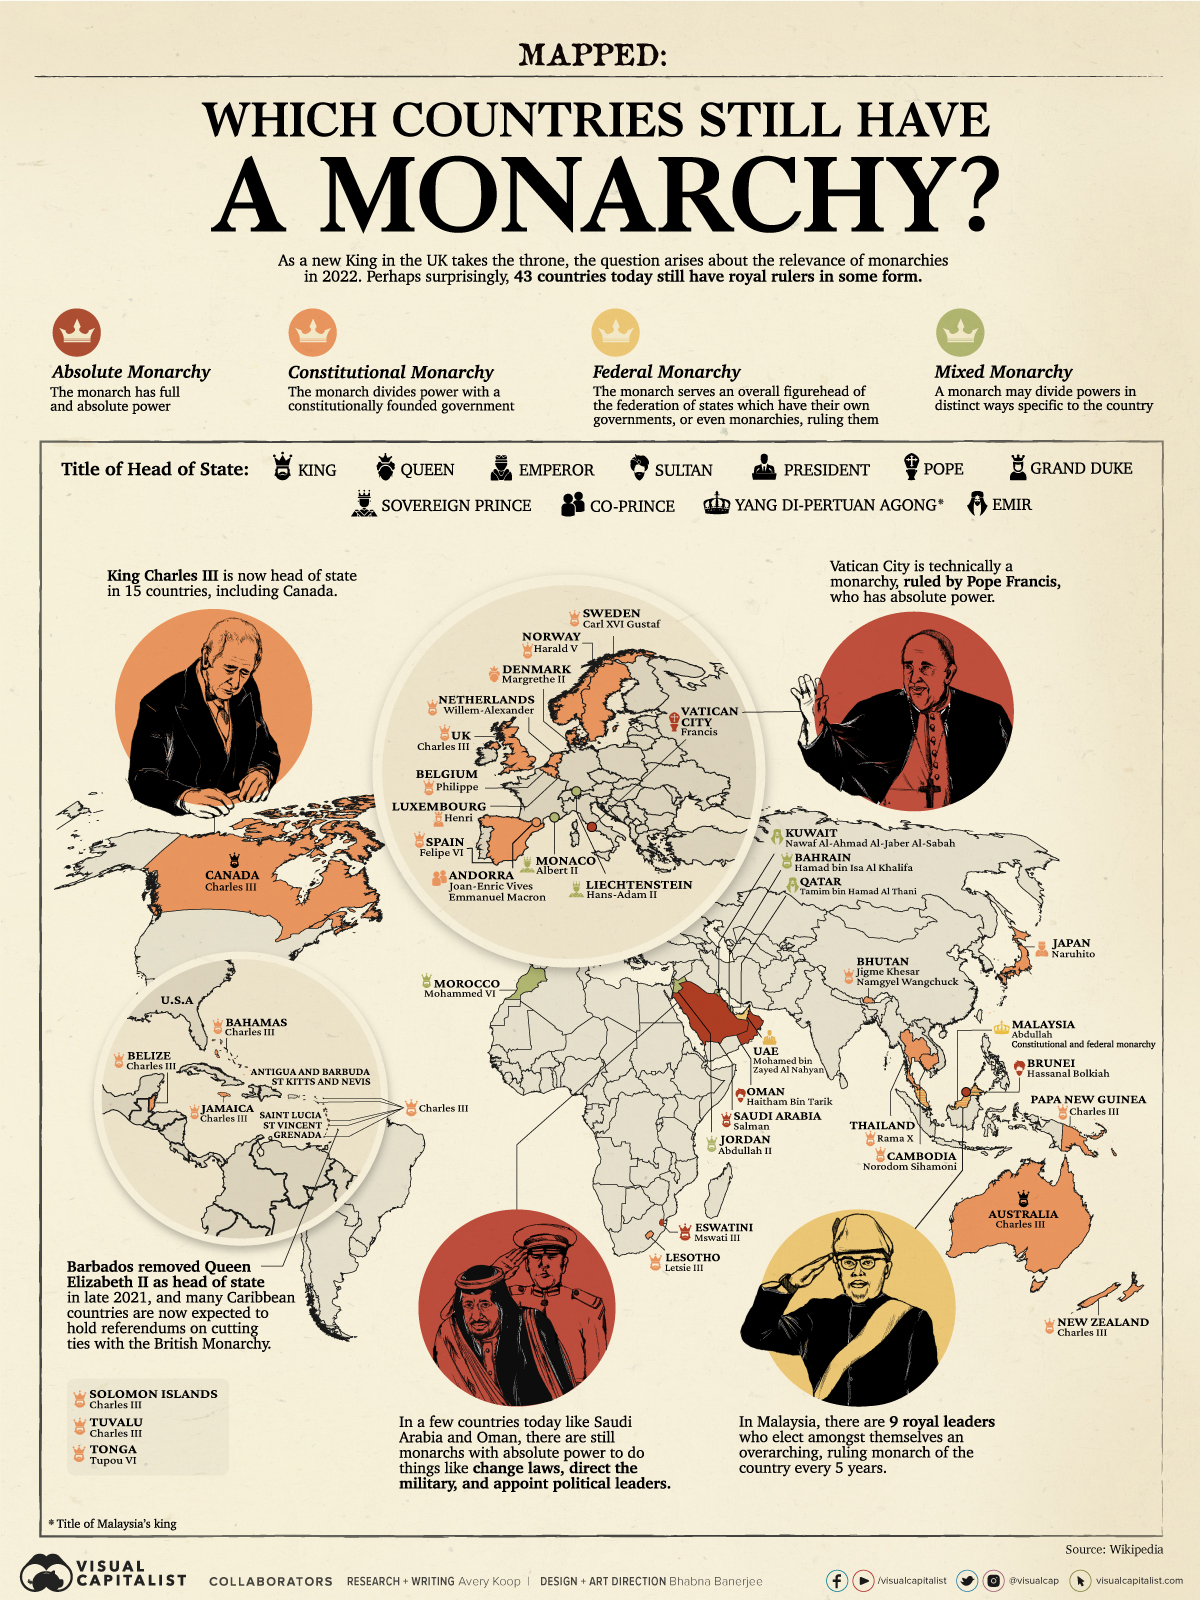 Map infographic showing the 43 countries that still have a monarchy